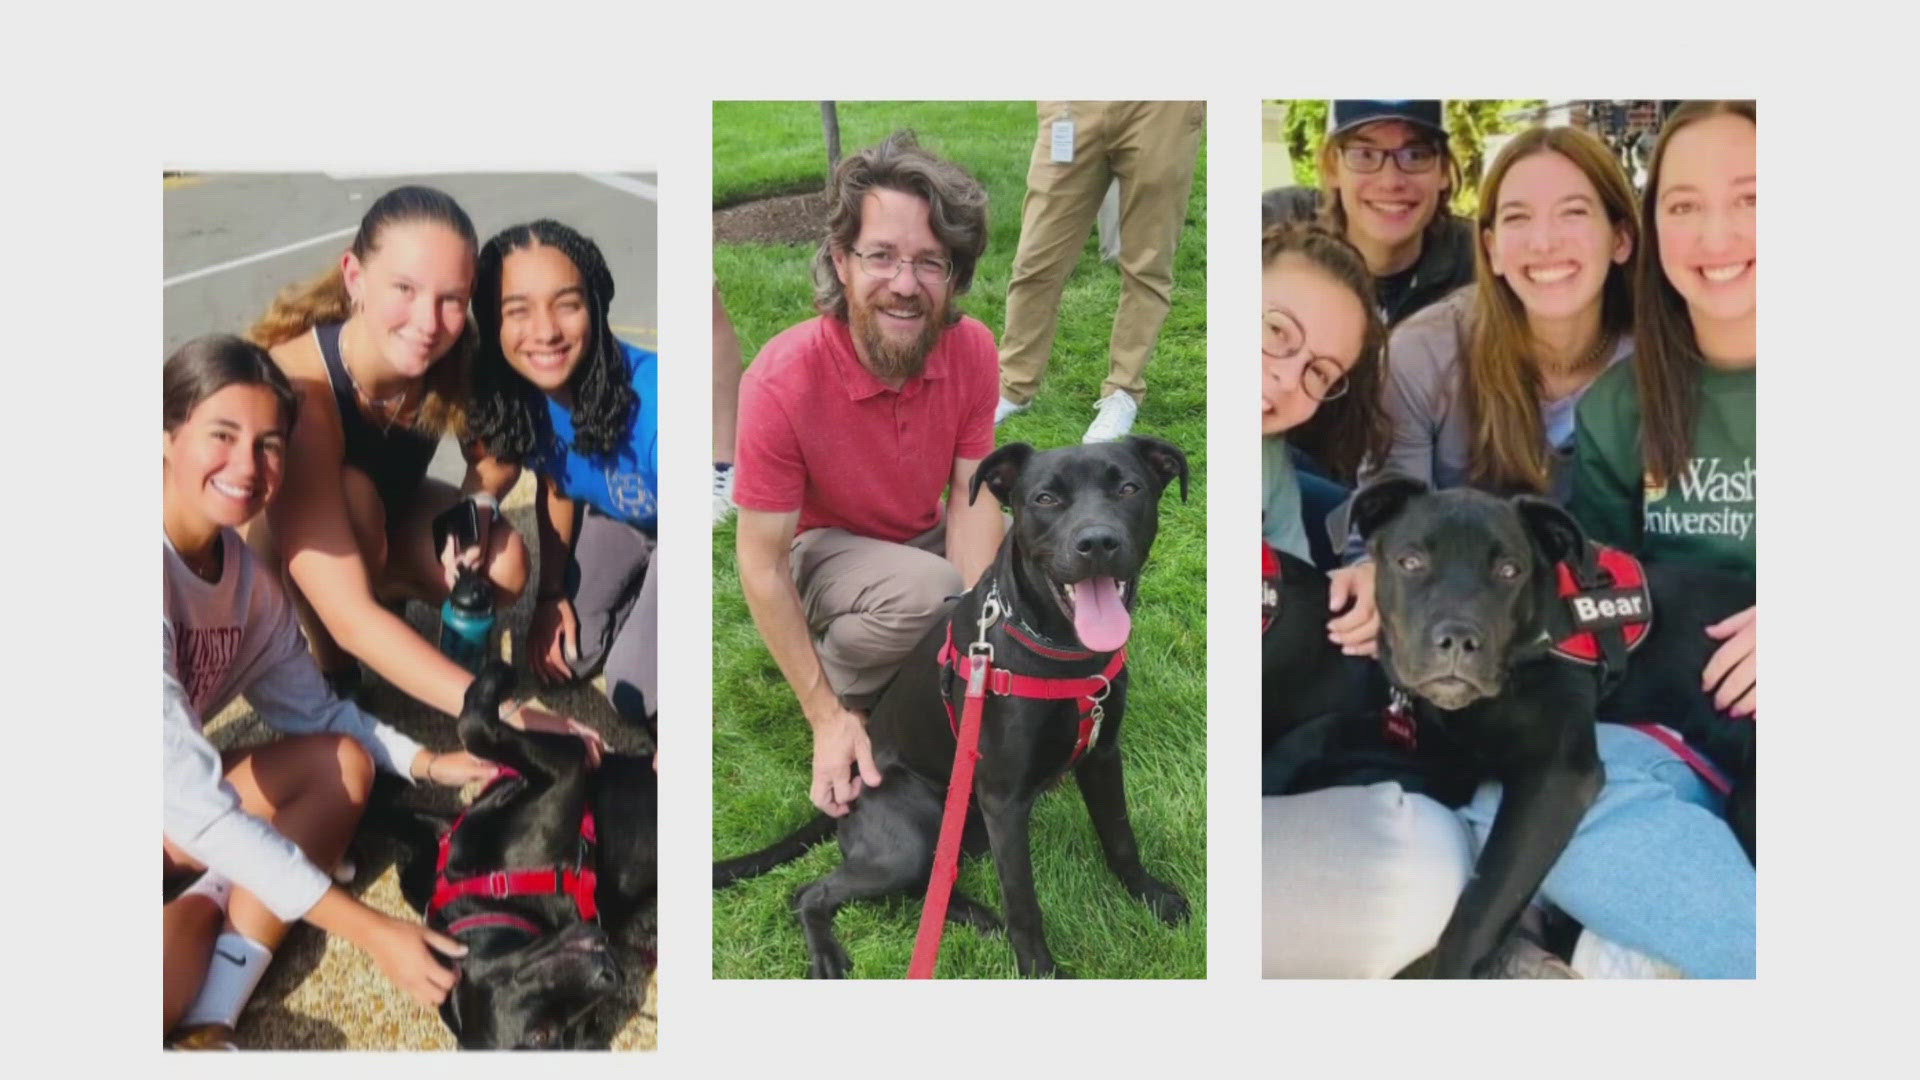 Two of Washington University's most popular figures don't pay tuition or live on campus. They're a canine duo spreading calm and comfort to students and faculty.